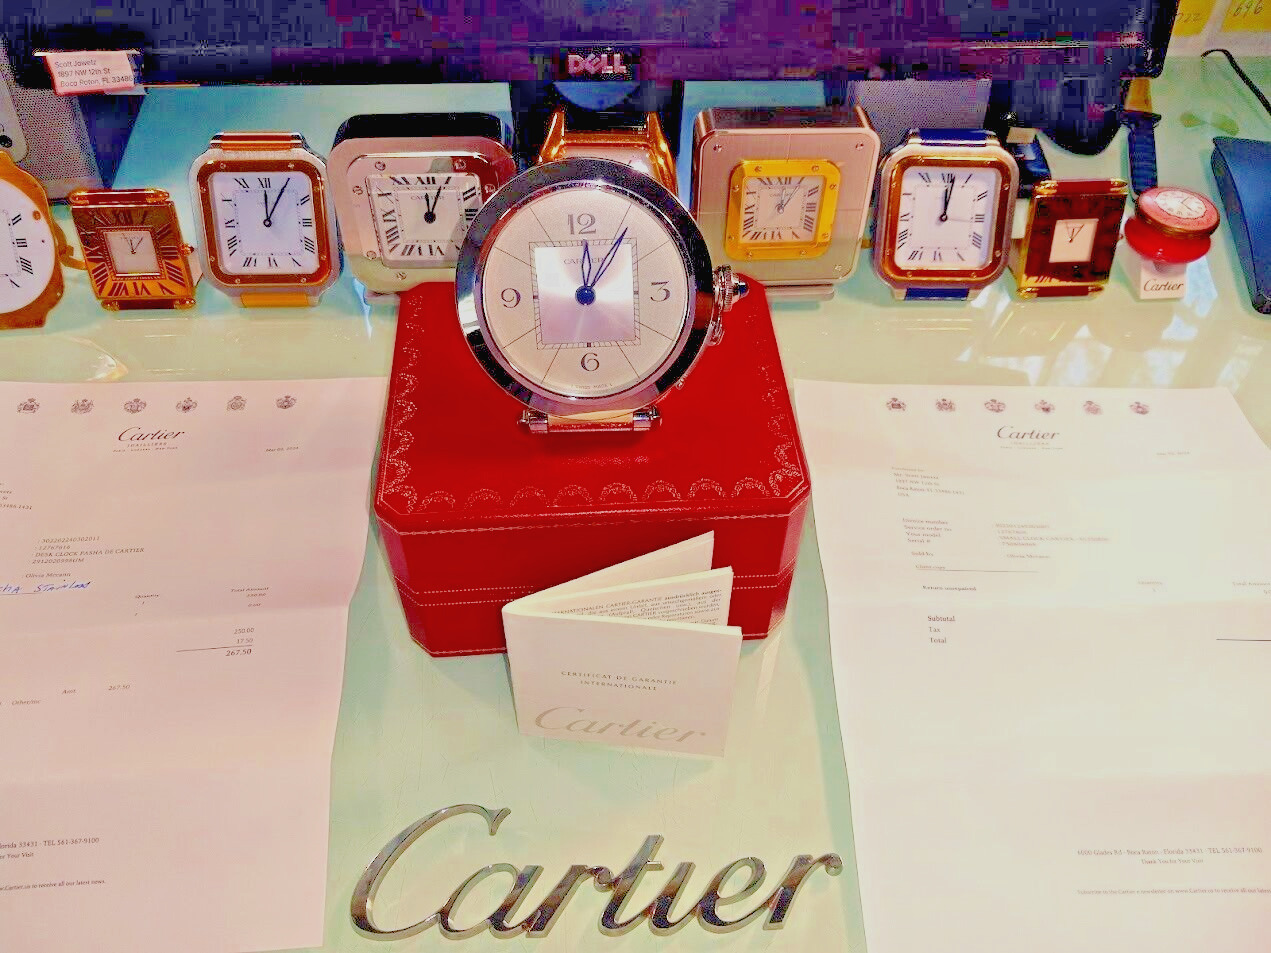 *** Cartier Pasha Jumbo Desk Alarm Clock with Box and booklets Mint A+  ***